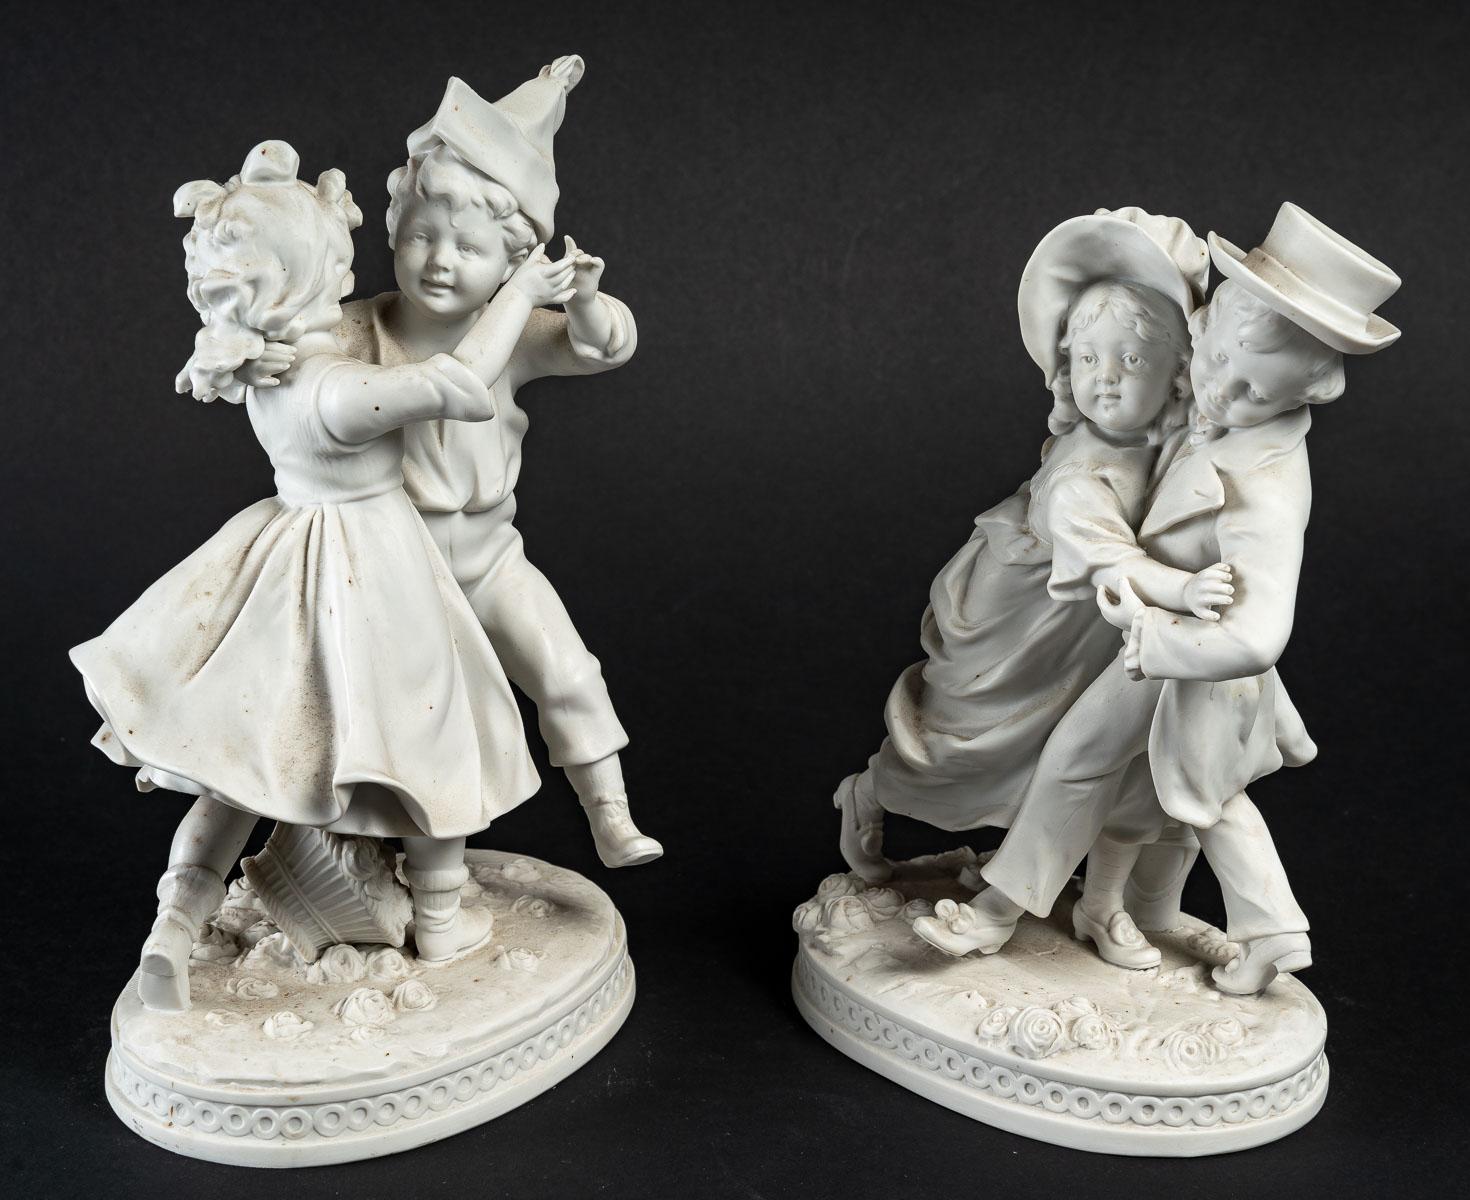 Porcelain Pair of small Biscuit sculptures, early 20th century